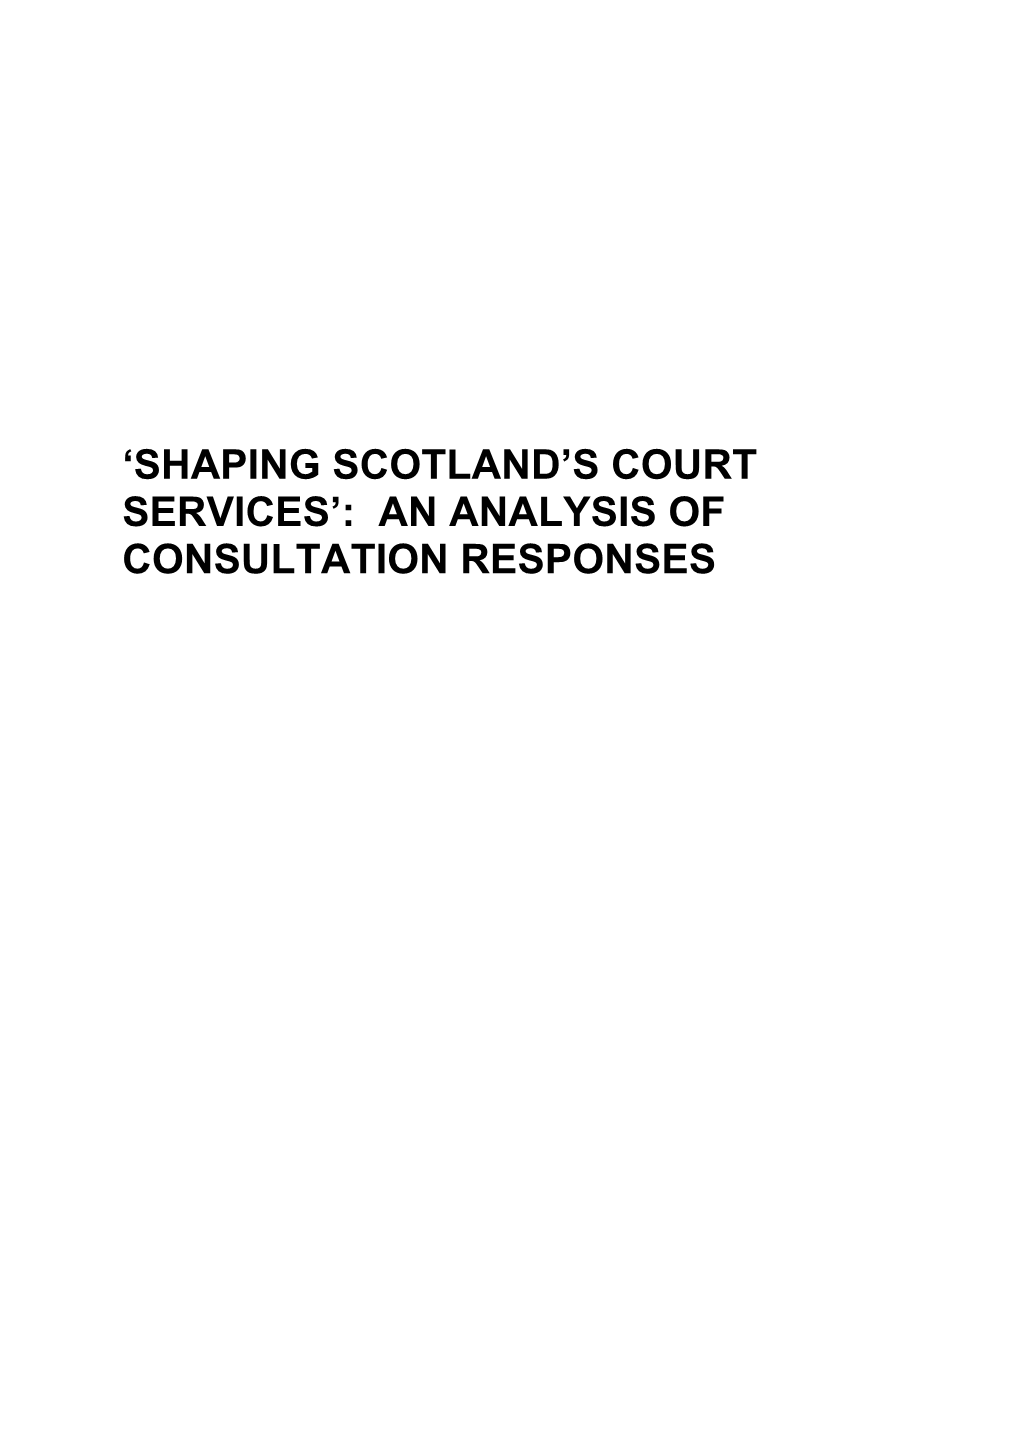 'Shaping Scotland's Court Services'